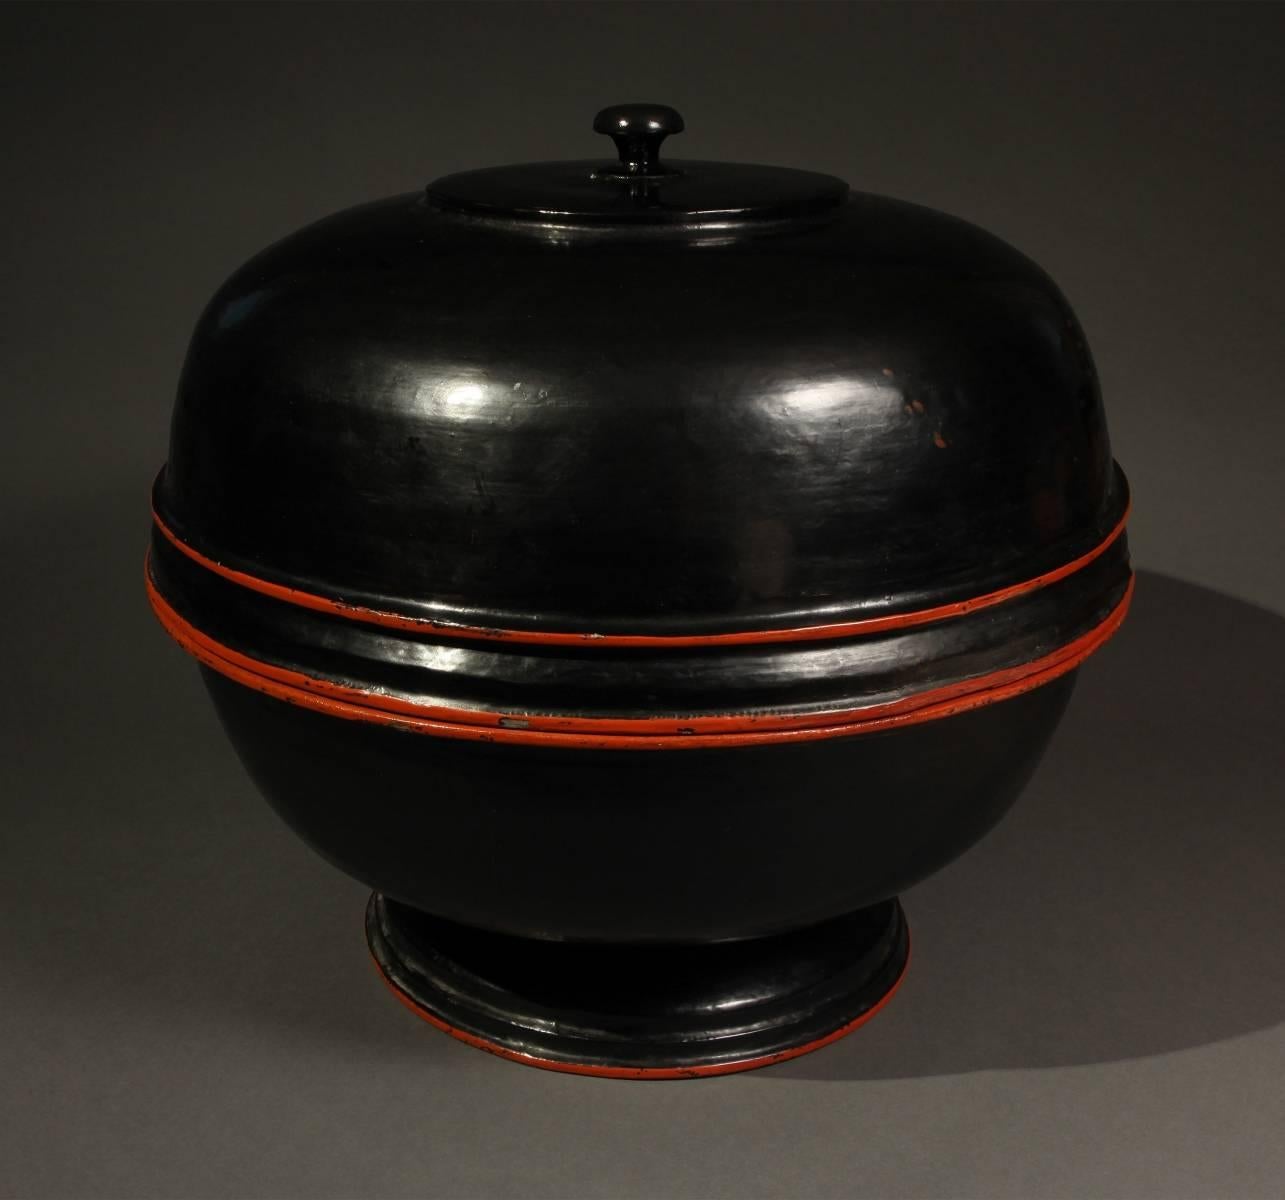 Offered by Vicki Shiba
Late 19th-early 20th century black lacquer tribal offering vessel, Burma

This is an elegant and unusual example of a large black bowl used to carry offerings to temple ceremonies.

 